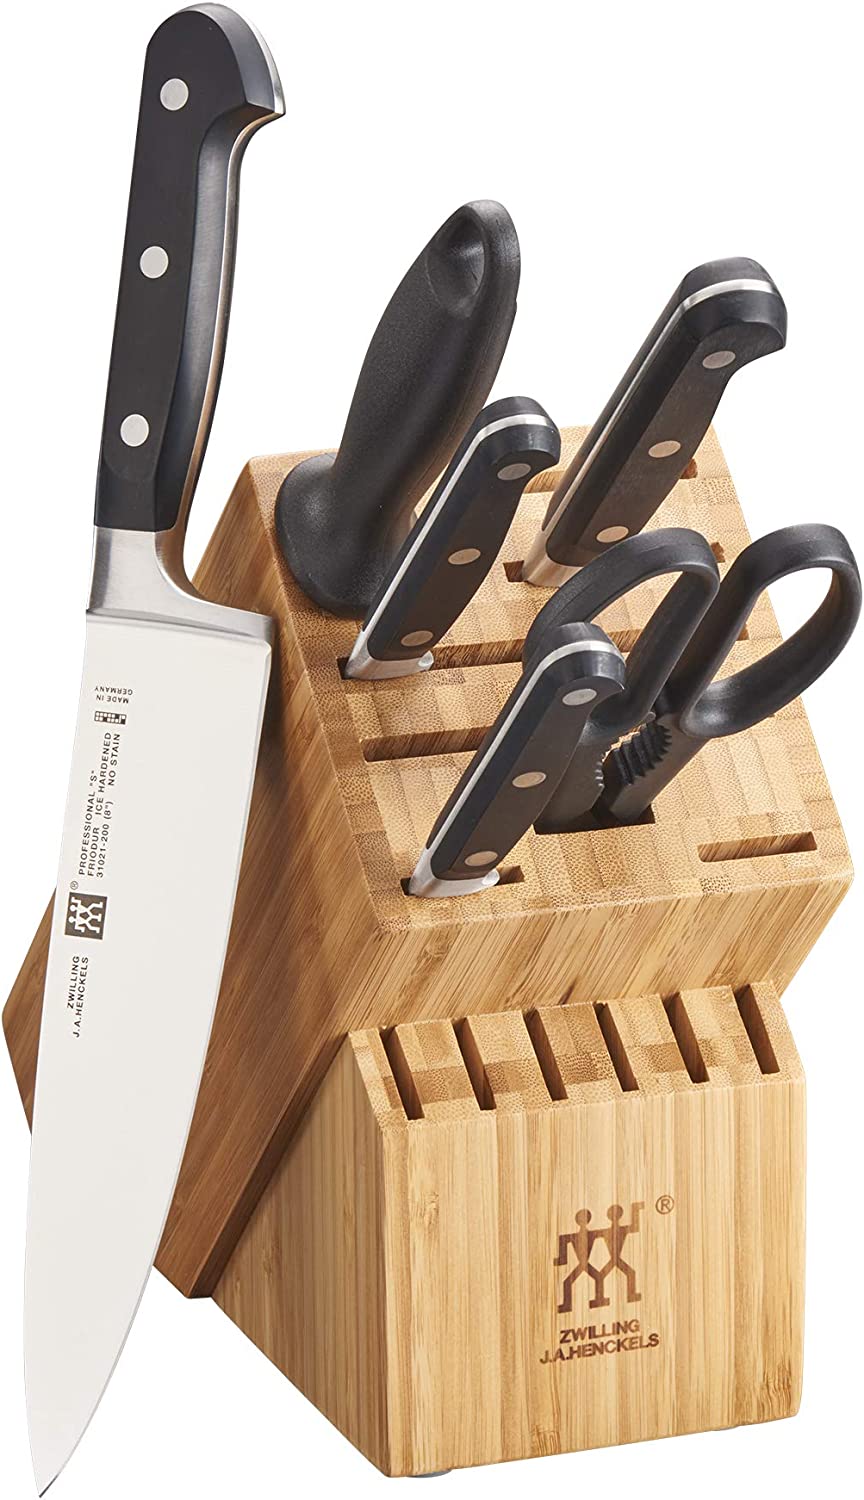 Zwilling Twin Professional S 7-piece Knife Set with Block